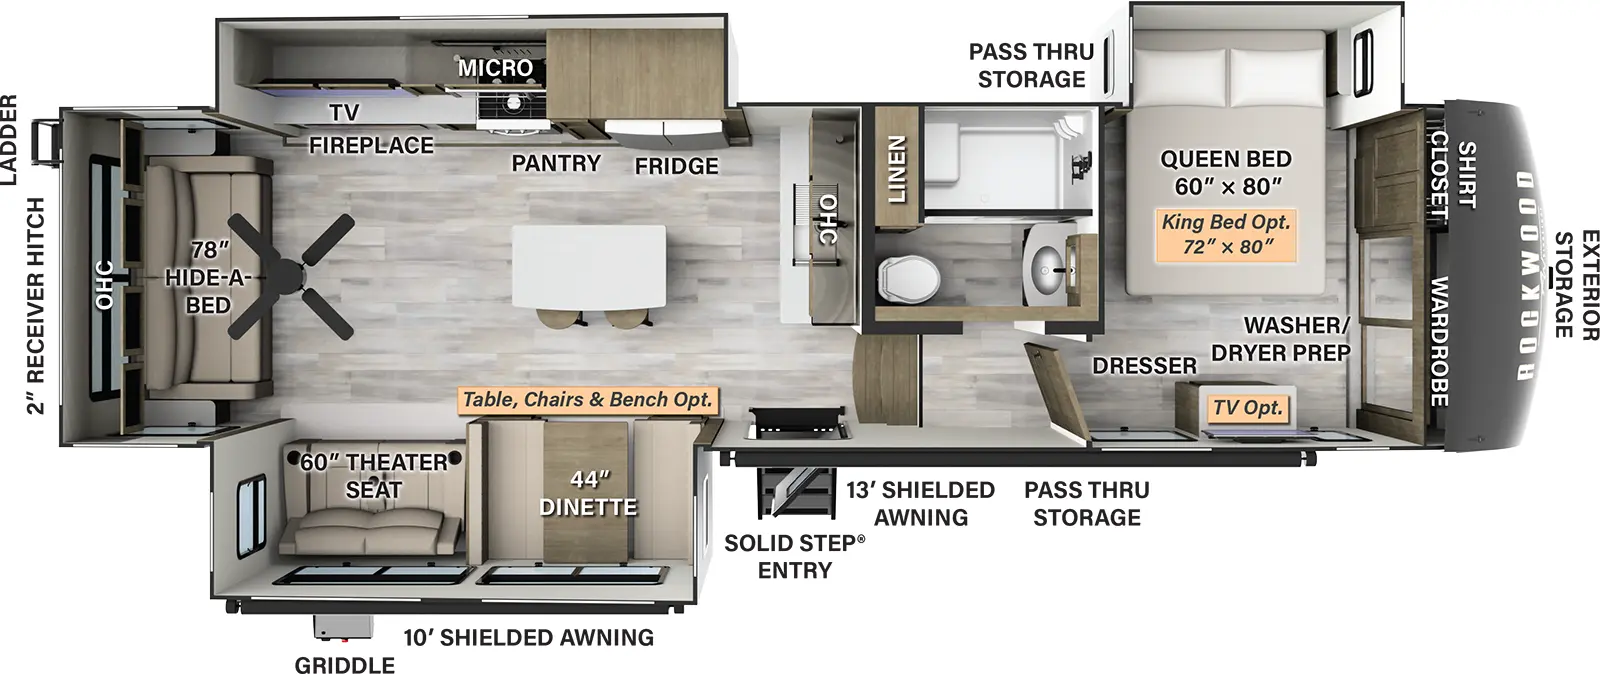 The 361RL has three slide outs and one entry door. Exterior features include a 13 foot shielded awning and 10 foot shielded awning, solid step entry, exterior storage, griddle, rear ladder, 2 inch receiver hitch, and pass thru storage. Interior layout front to back: front bedroom with an off-door side queen bed slide out, front wardrobe, shirt closet, washer/dryer prep, and dresser (optional TV and king bed available); side aisle full bathroom with linen closet; steps down to kitchen living area; kitchen counter with sink and overhead cabinet along inner wall; off-door side slide out with refrigerator, pantry, microwave, cooktop, overhead storage, TV and fireplace; door side slideout with dinette (table, chairs & bench optional) and theater seating; kitchen island with stools; rear hide-a-bed sofa, overhead cabinet and paddle fan. 